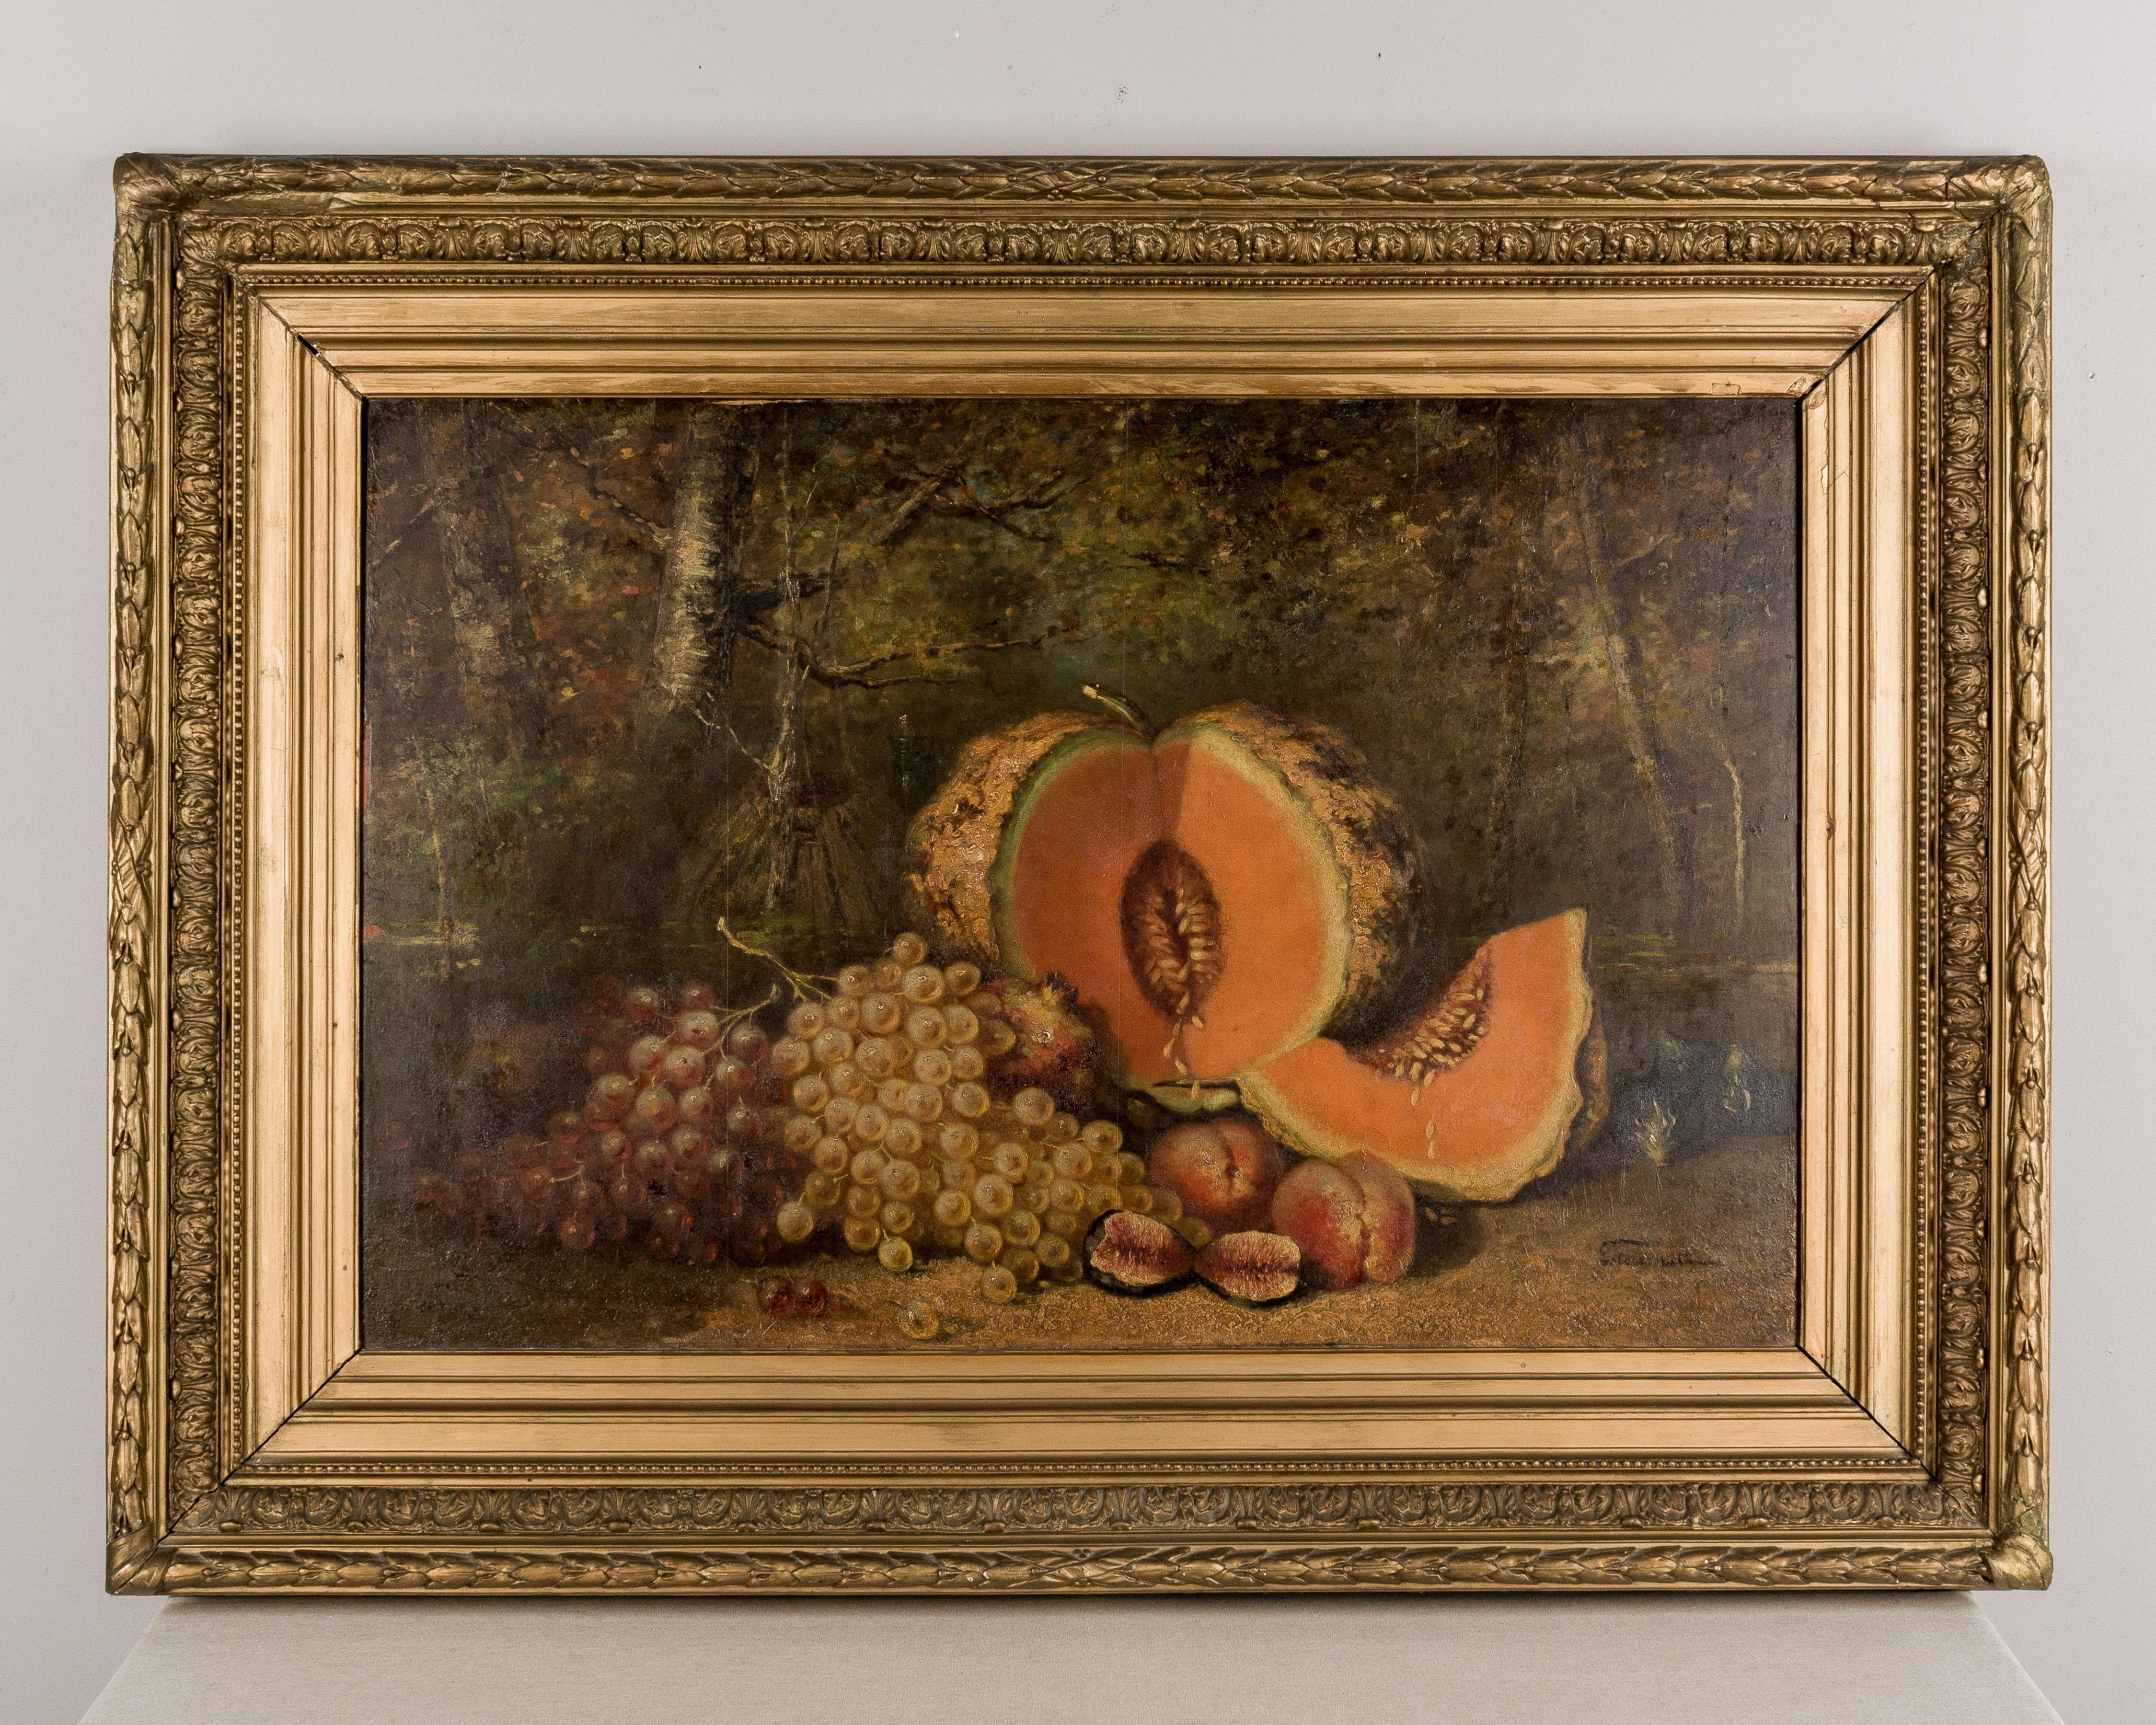 A large 19th century French still life with melons and Mediterranean fruits. Oil on a mahogany board. Signed lower right: Estournet. Heavy gilded wood and gesso frame.
Please refer to photos for more details. Pictures are part of the description.